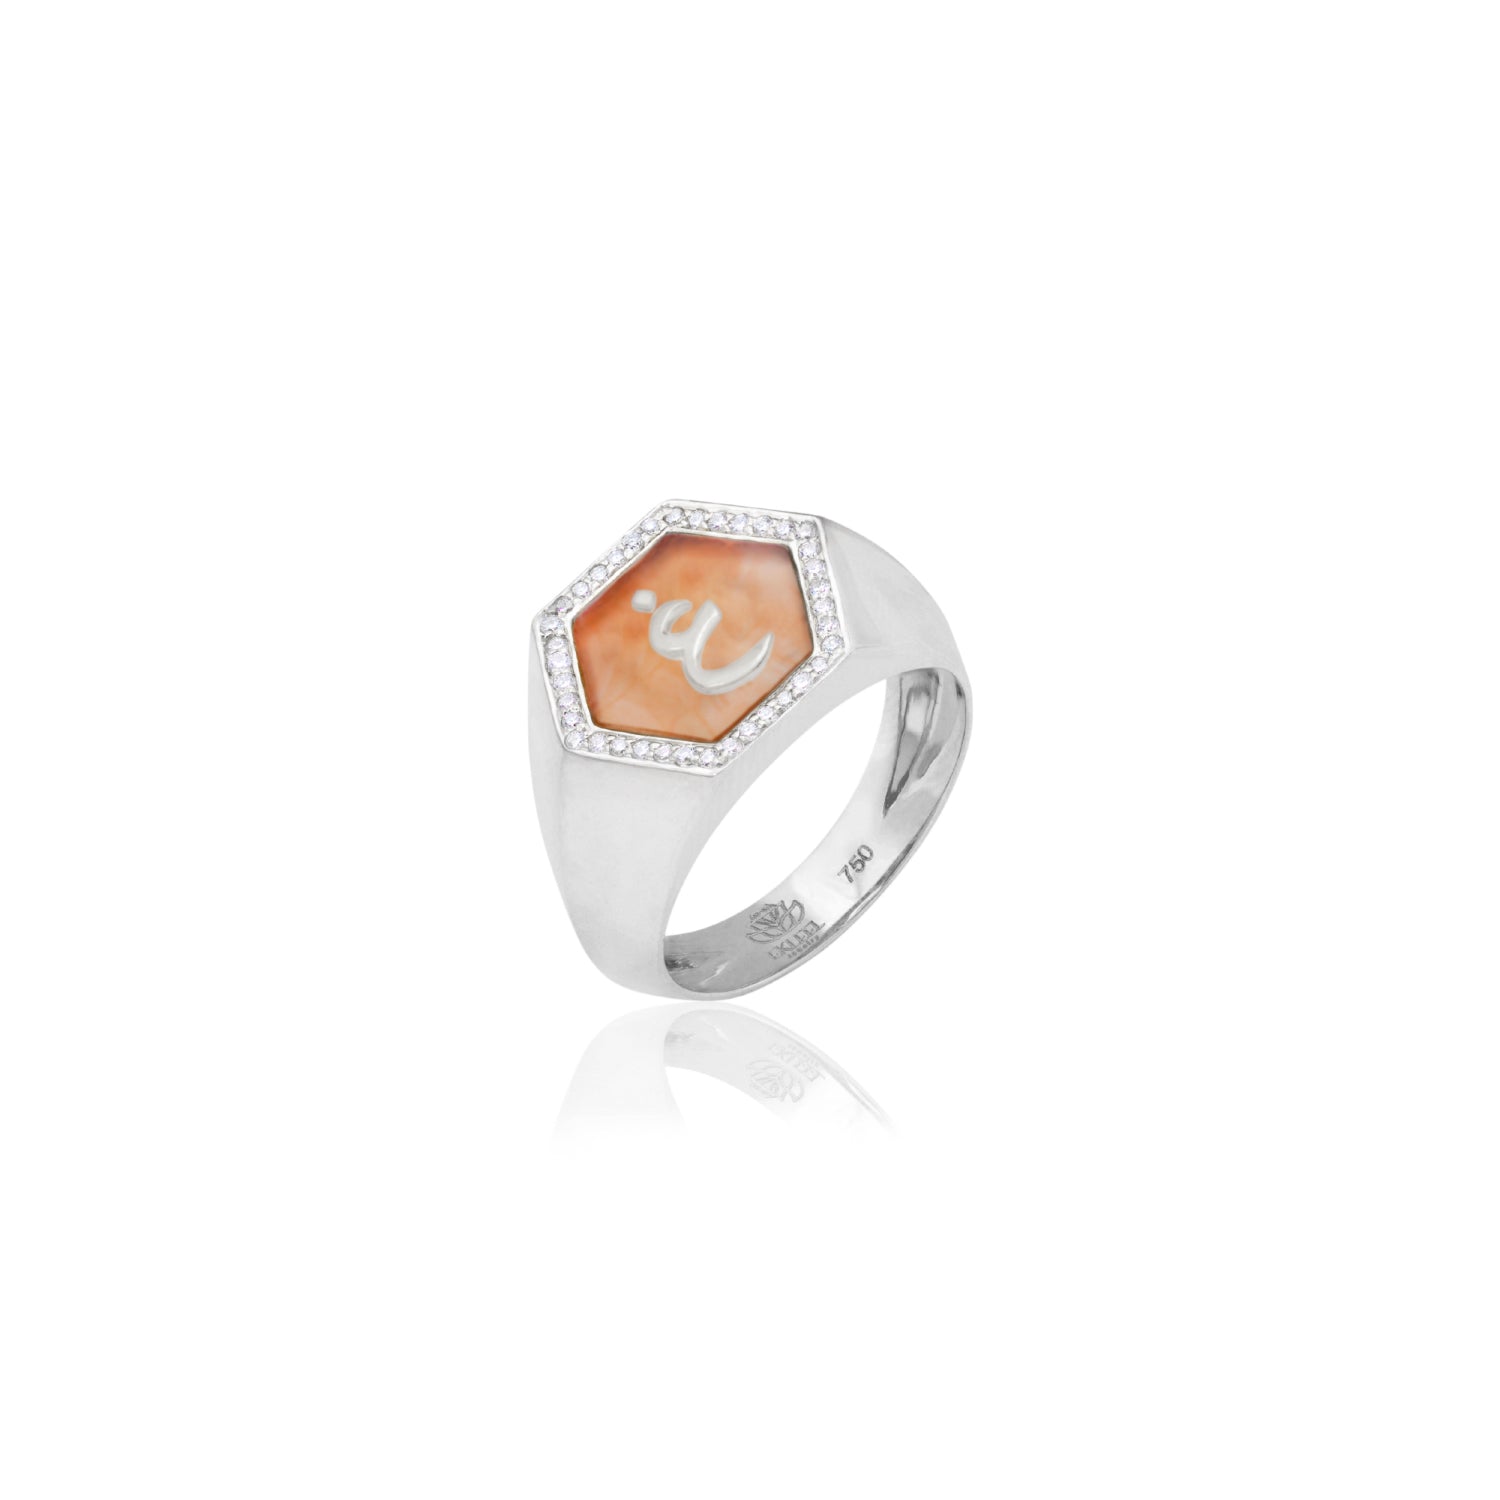 Qamoos 2.0 Letter غ Carnelian and Diamond Signet Ring in White Gold